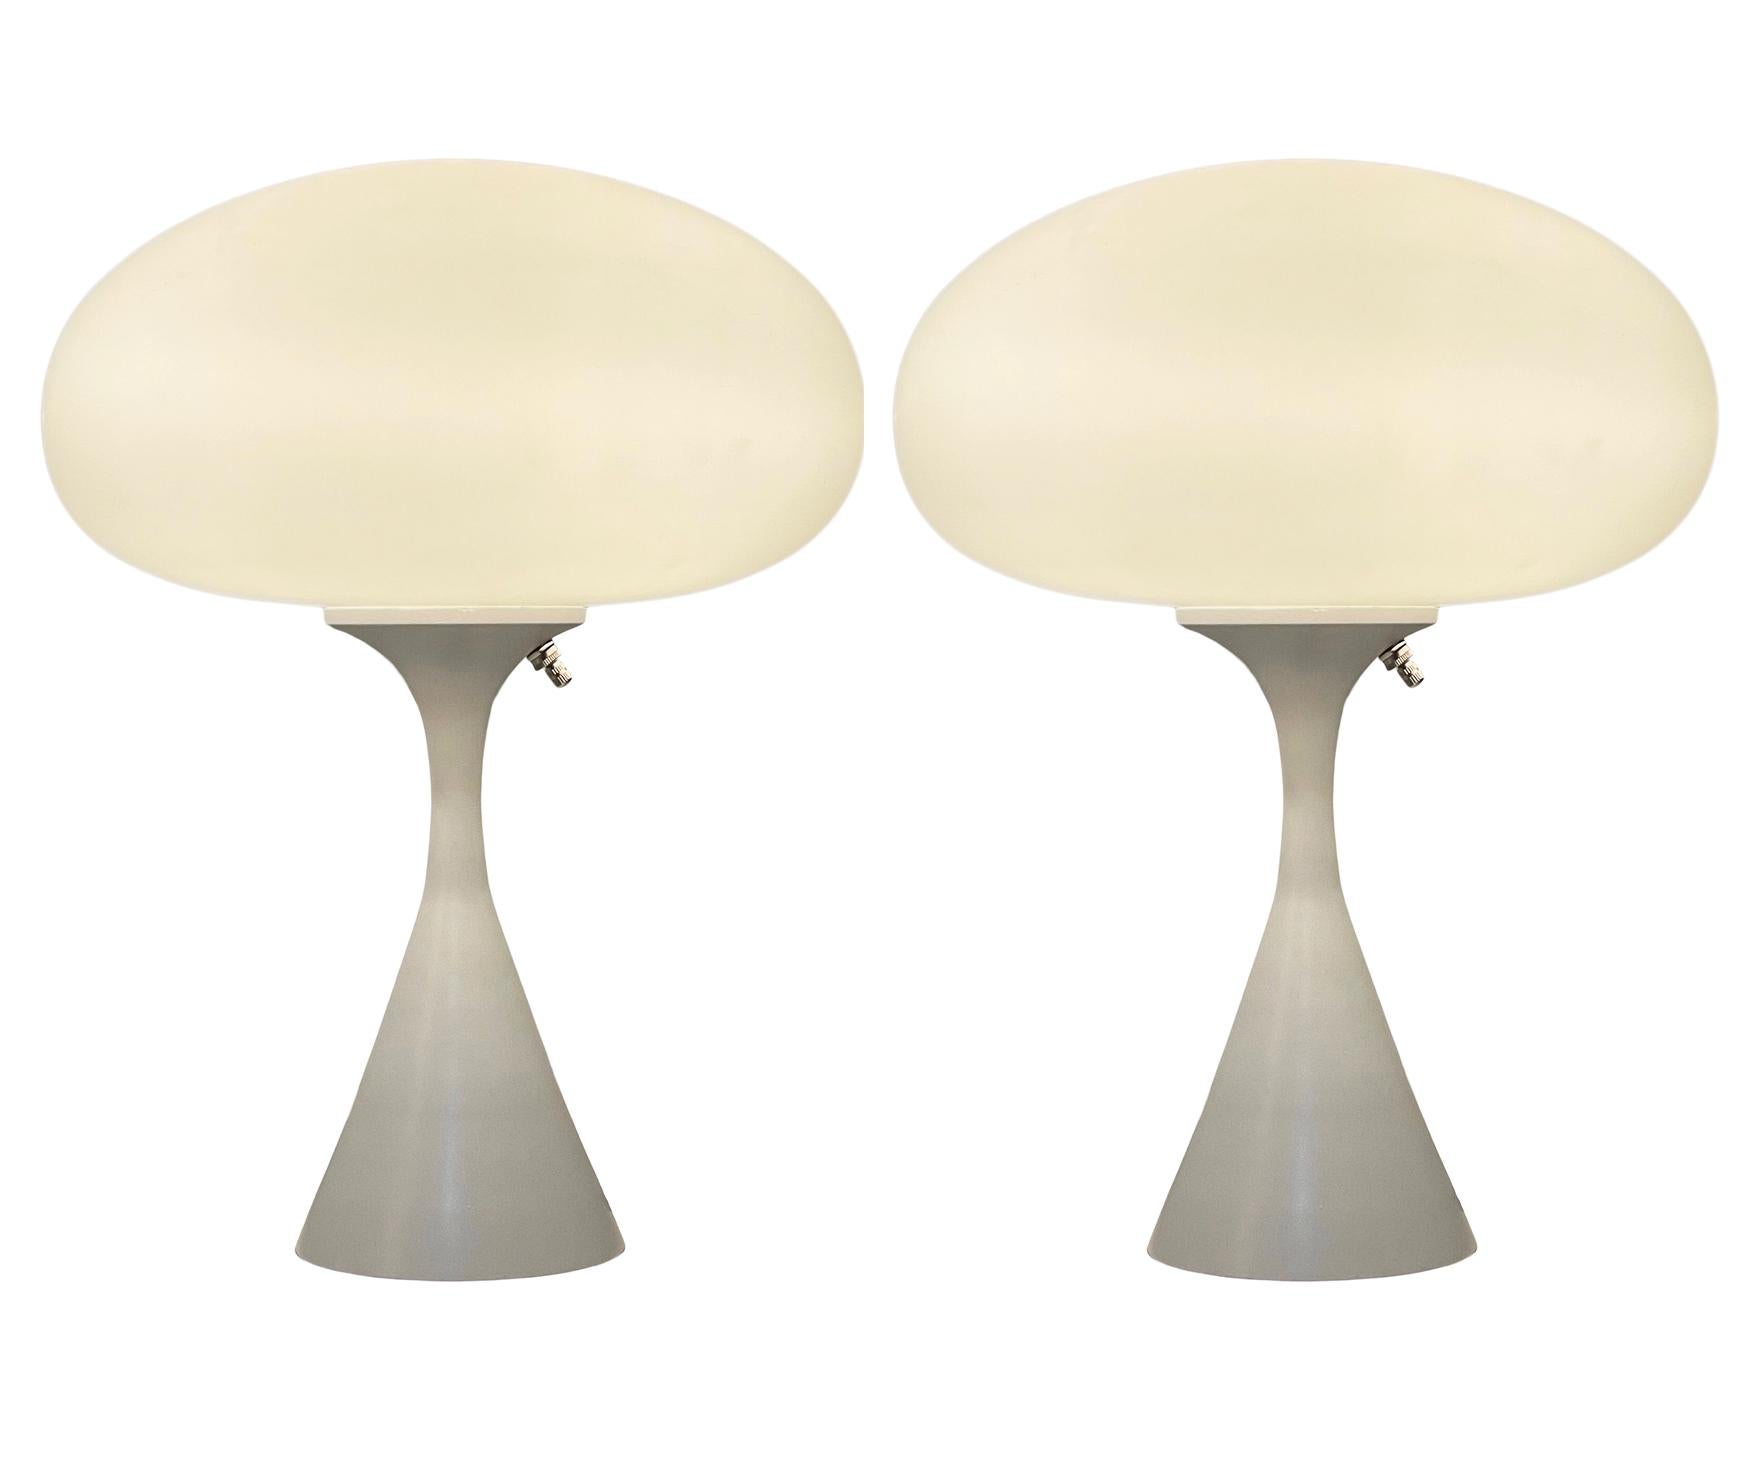 A handsome matching pair of table lamps in a conical mushroom form after Laurel Lamp Company. The lamp features a cast aluminum base with a white powder coat and a mouth blown frosted glass lamp shade. Price includes the pair as shown.